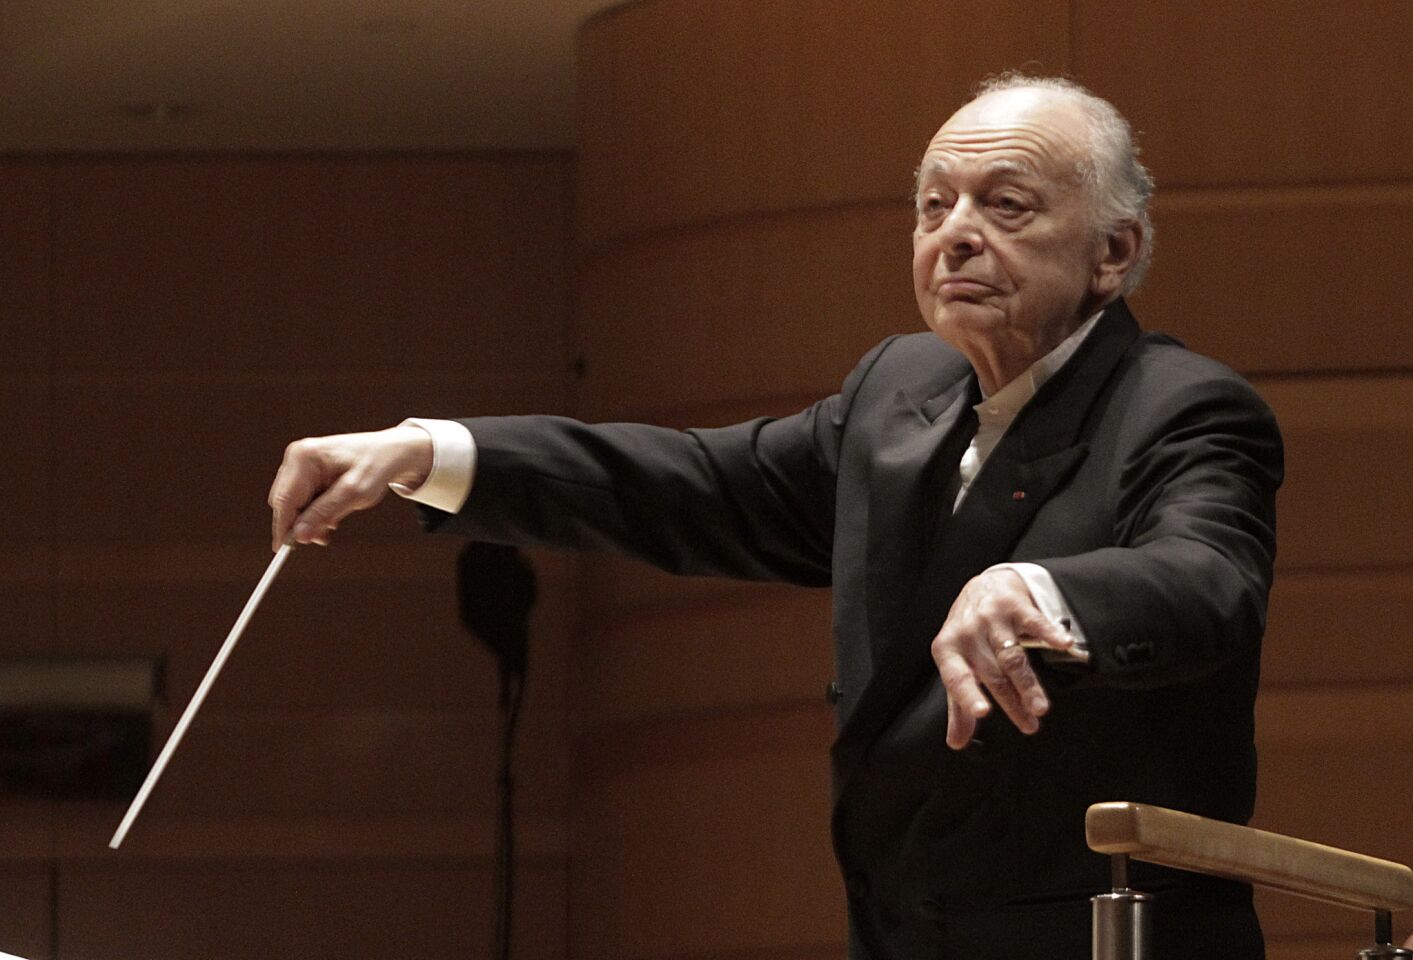 The world-renowned conductor held top posts with the Vienna State Opera, the Cleveland Orchestra and the New York Philharmonic, among others. Over the course of his career, he conducted an average of two concerts a week for more than 70 years. He was 84.